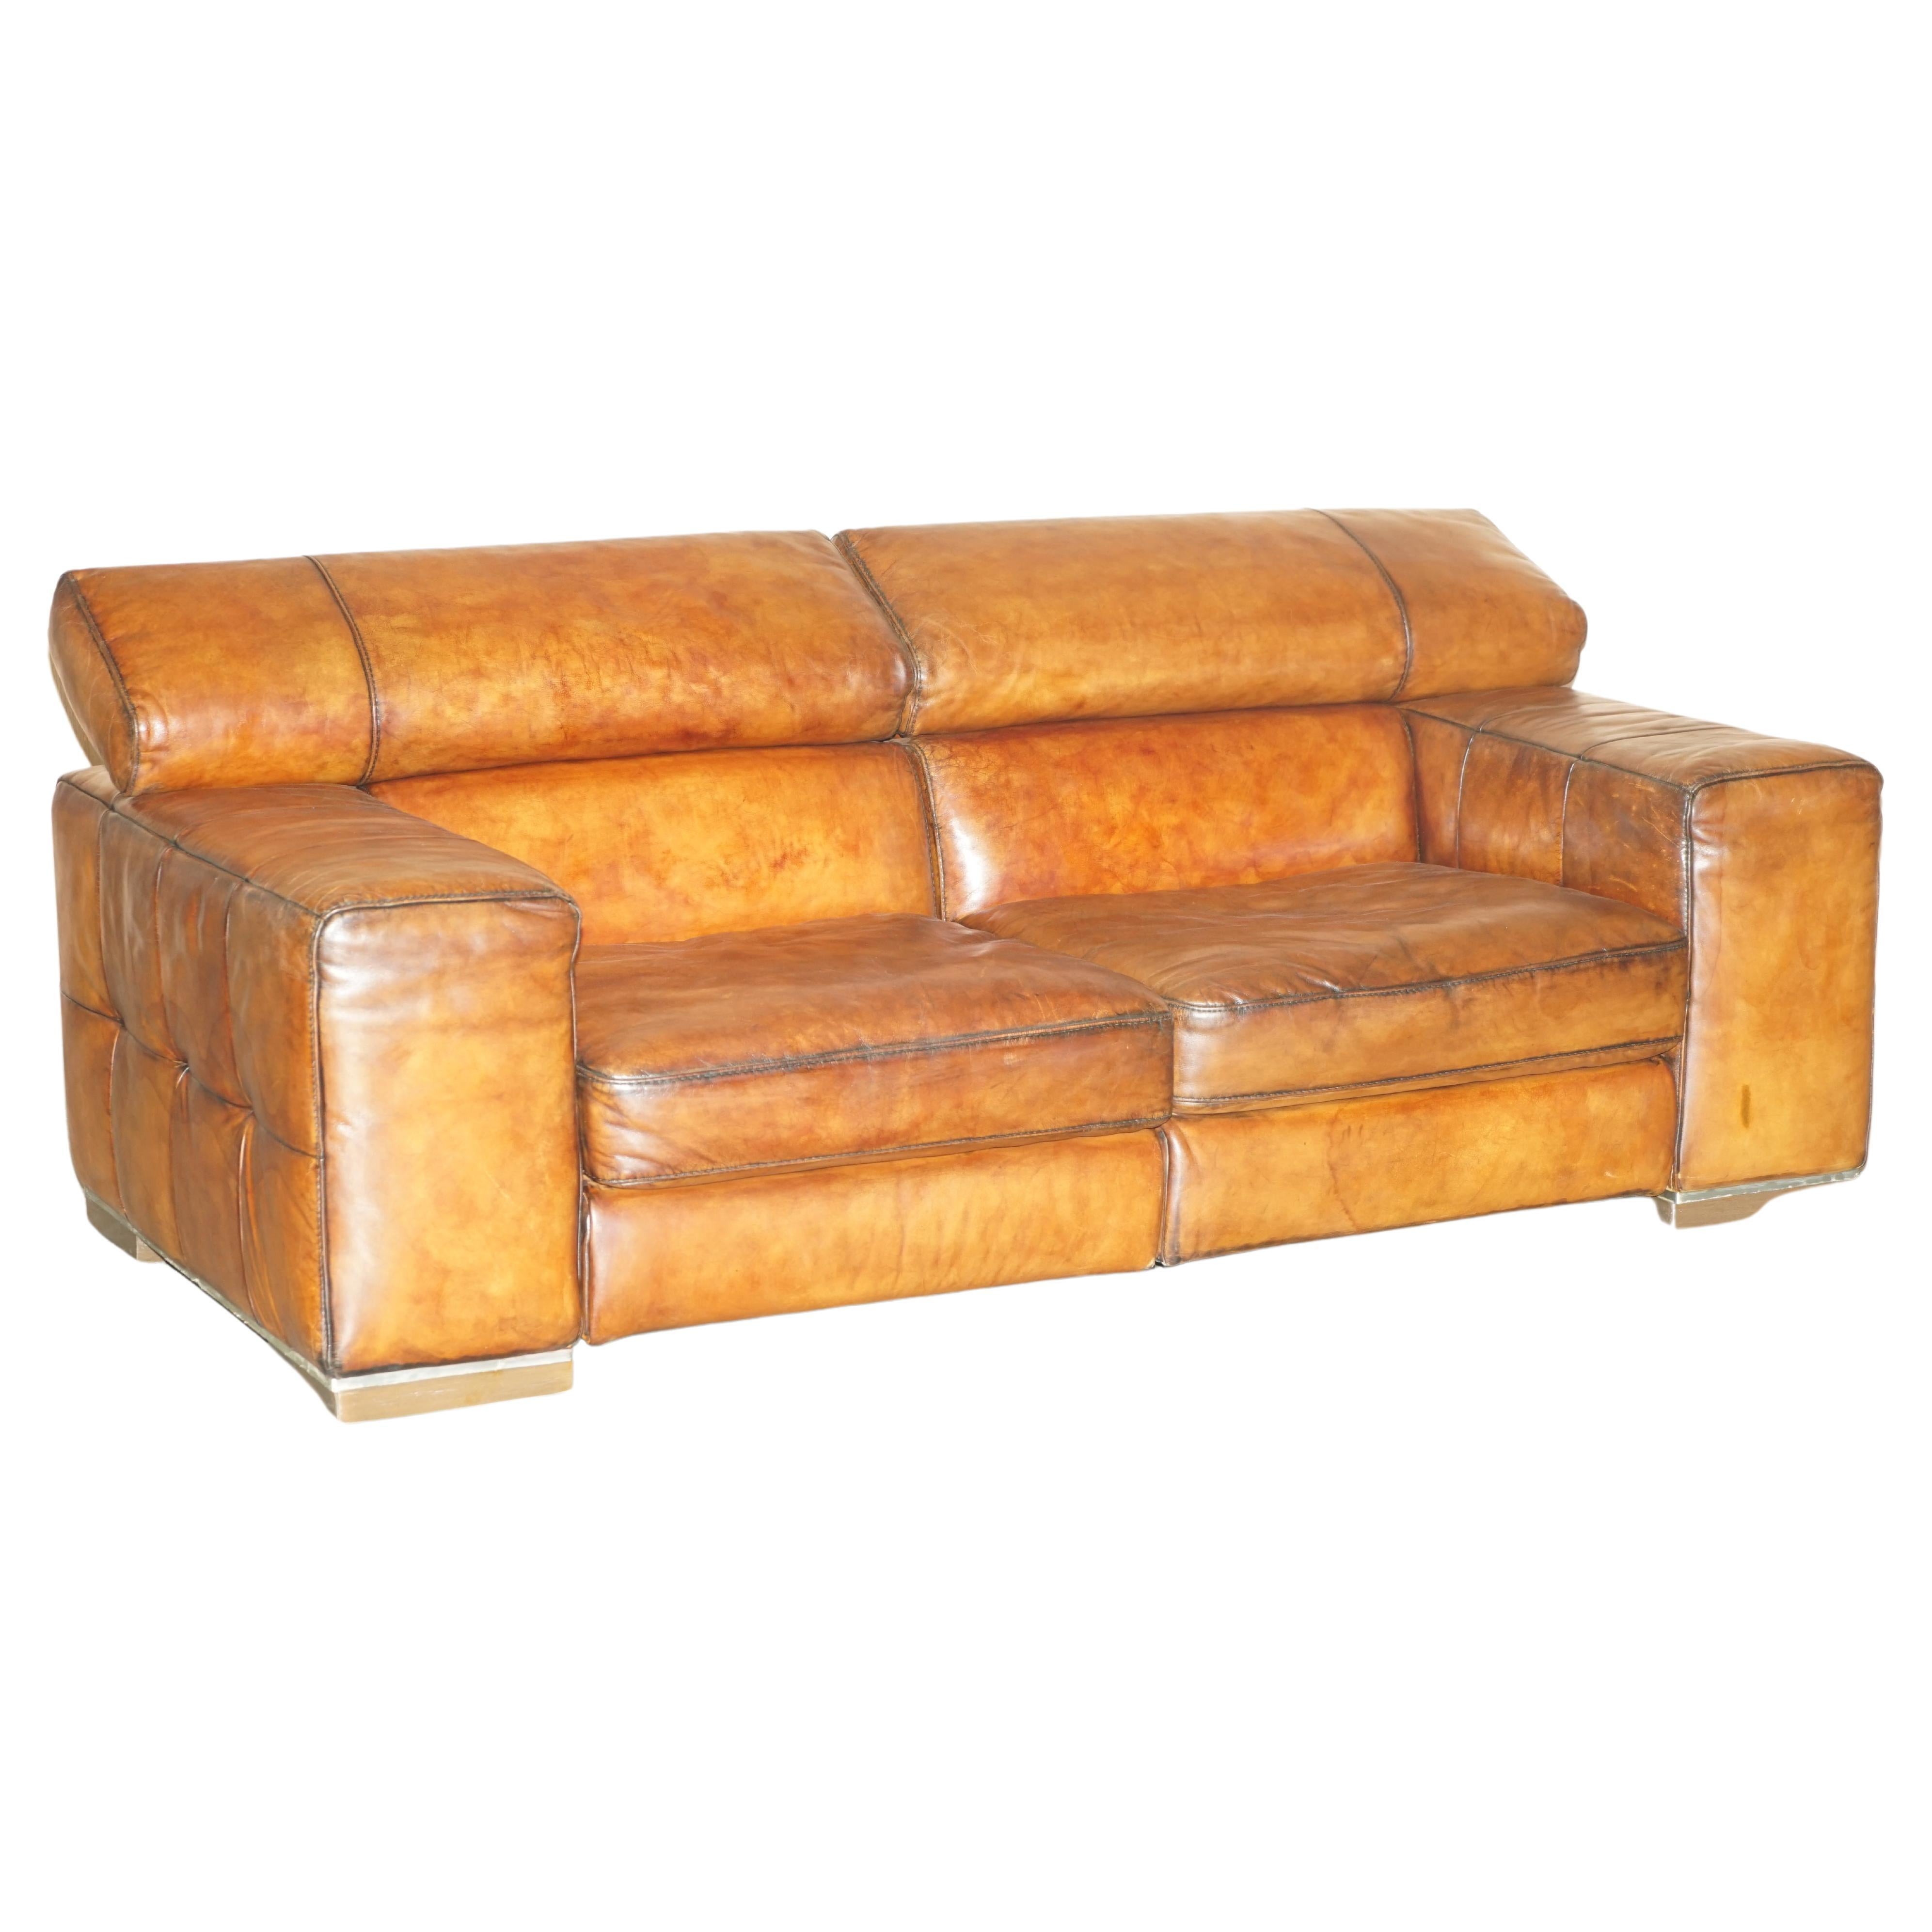 Natuzzi Roma Hand Dyed Cigar Brown Leather Sofa Raising Headrest Part of a Suite For Sale